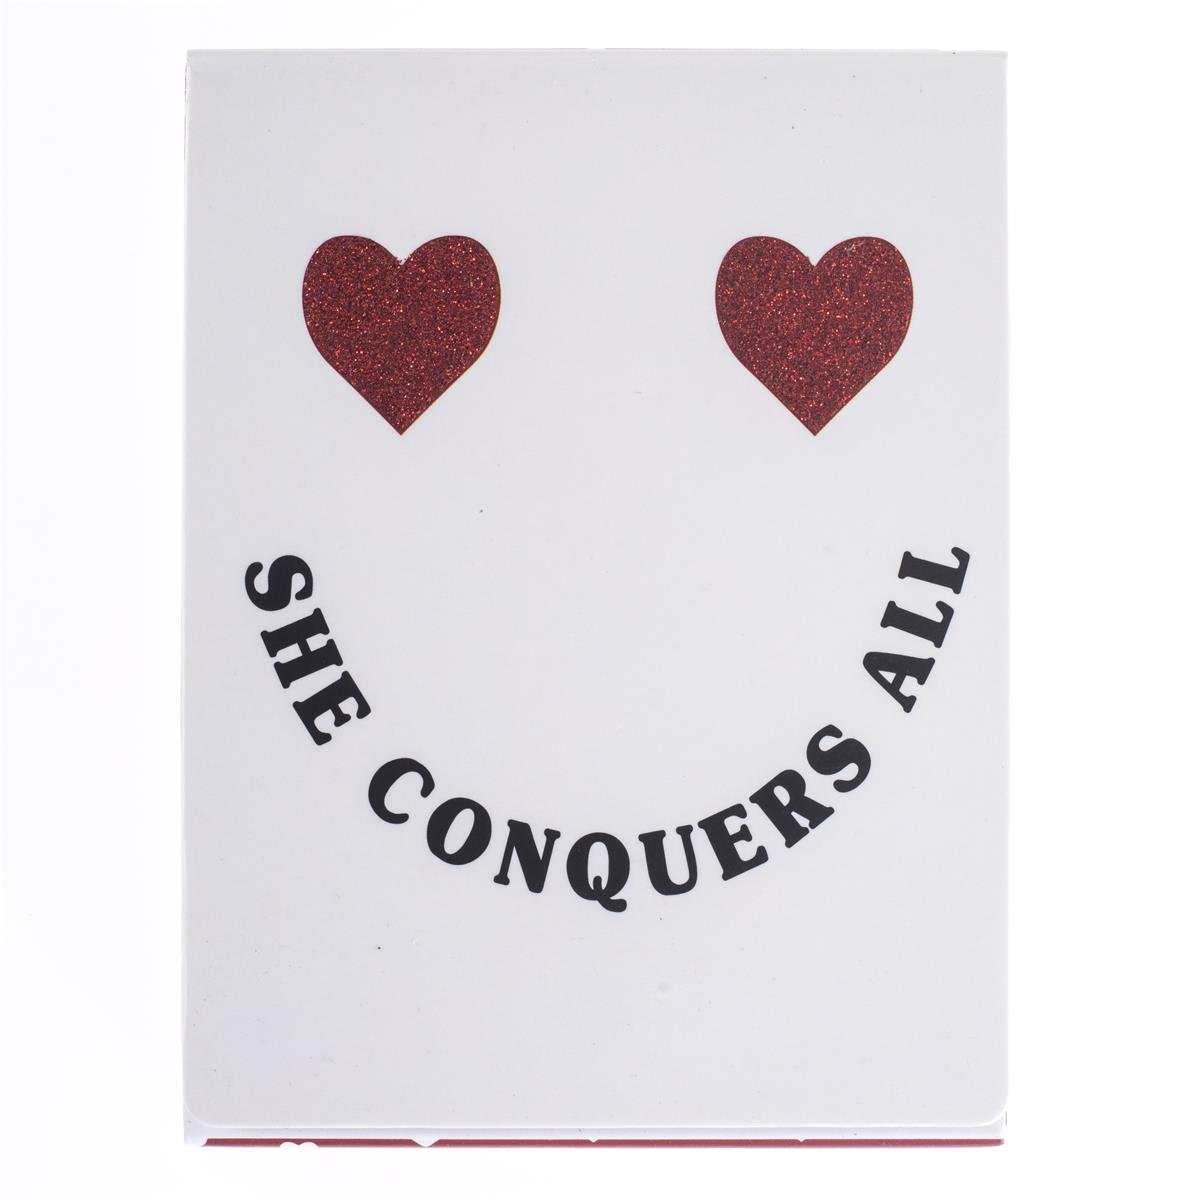 She Conquers All Pocket Note in Smile Heart Design